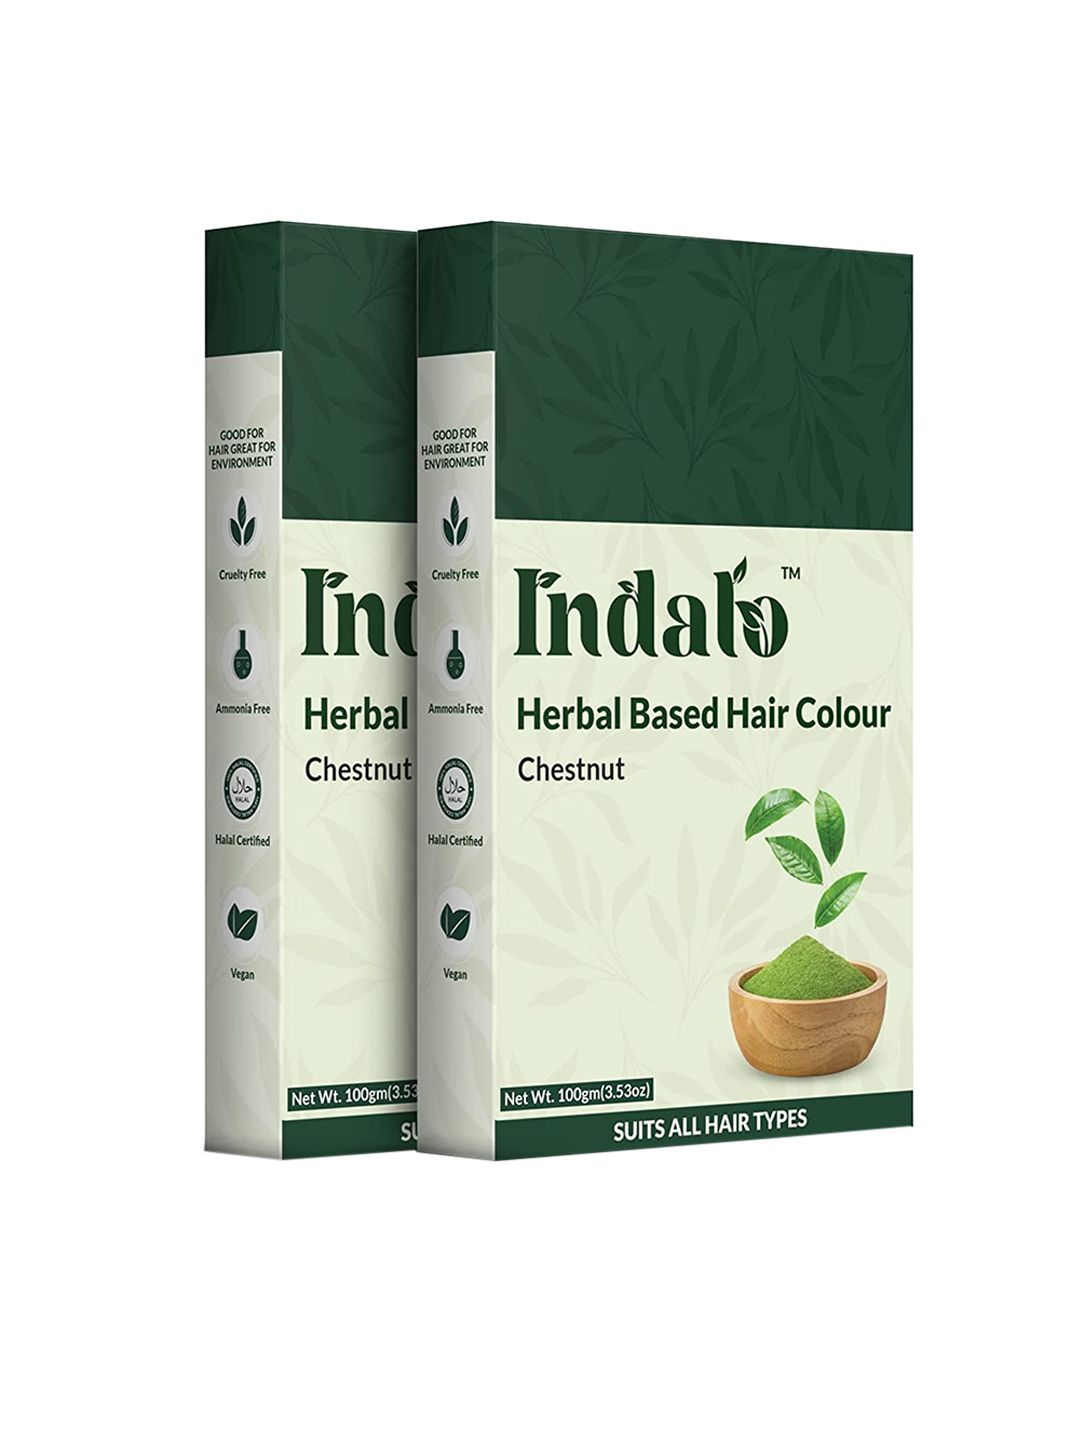 INDALO Set Of 2 No Ammonia Herbal Based Hair Colour with Amla & Brahmi 100g Each- Chestnut Price in India